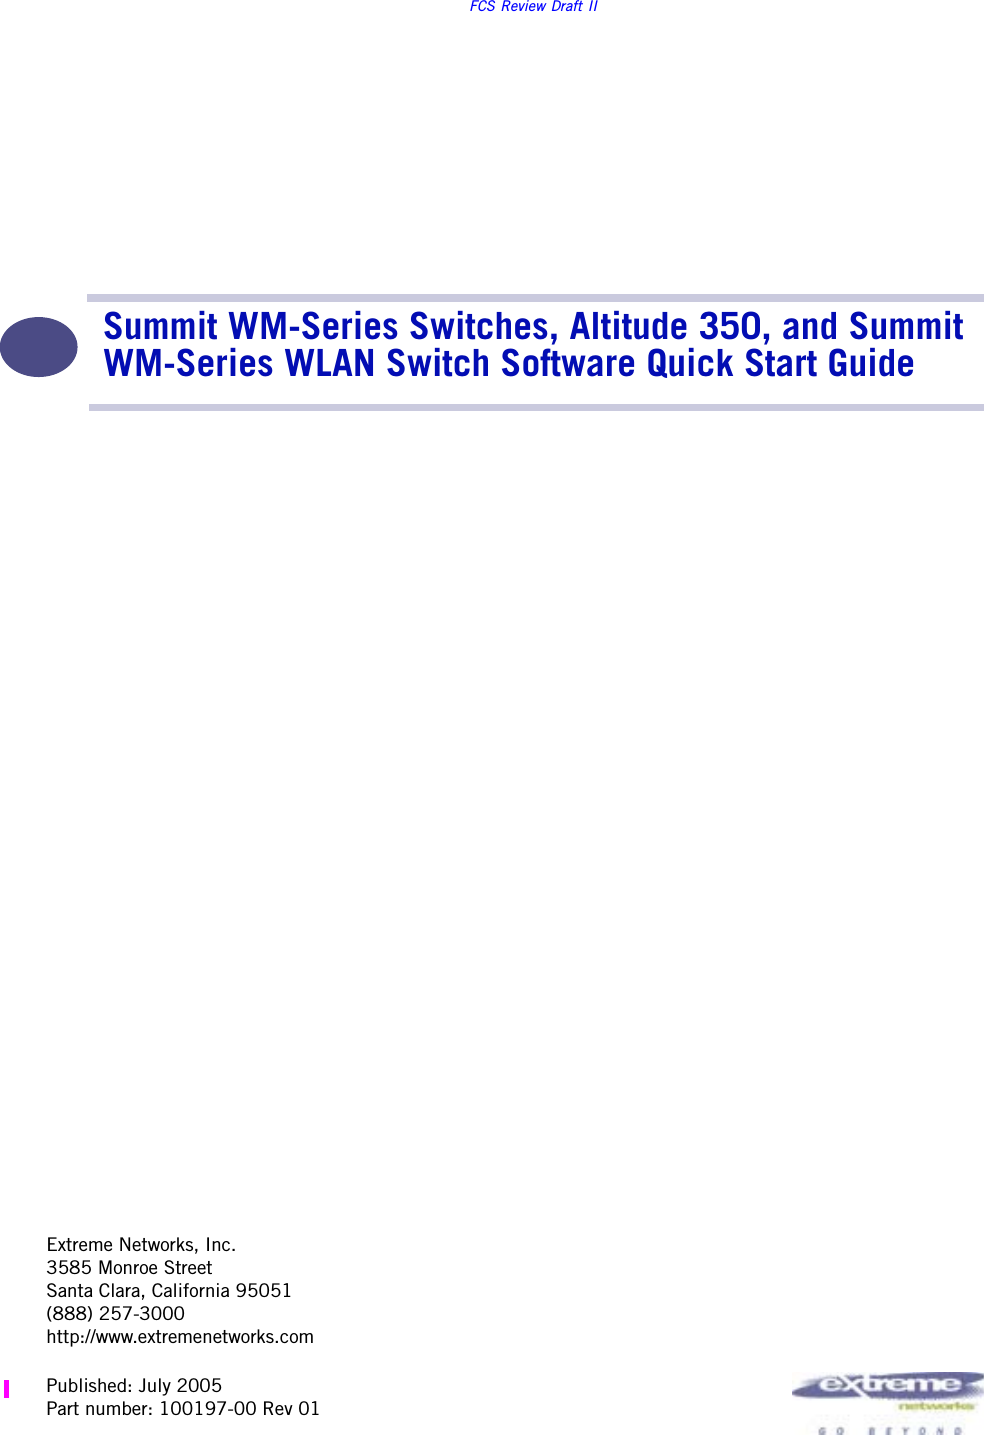 Extreme Networks, Inc.3585 Monroe StreetSanta Clara, California 95051(888) 257-3000http://www.extremenetworks.comFCS Review Draft IISummit WM-Series Switches, Altitude 350, and Summit WM-Series WLAN Switch Software Quick Start Guide Published: July 2005Part number: 100197-00 Rev 01